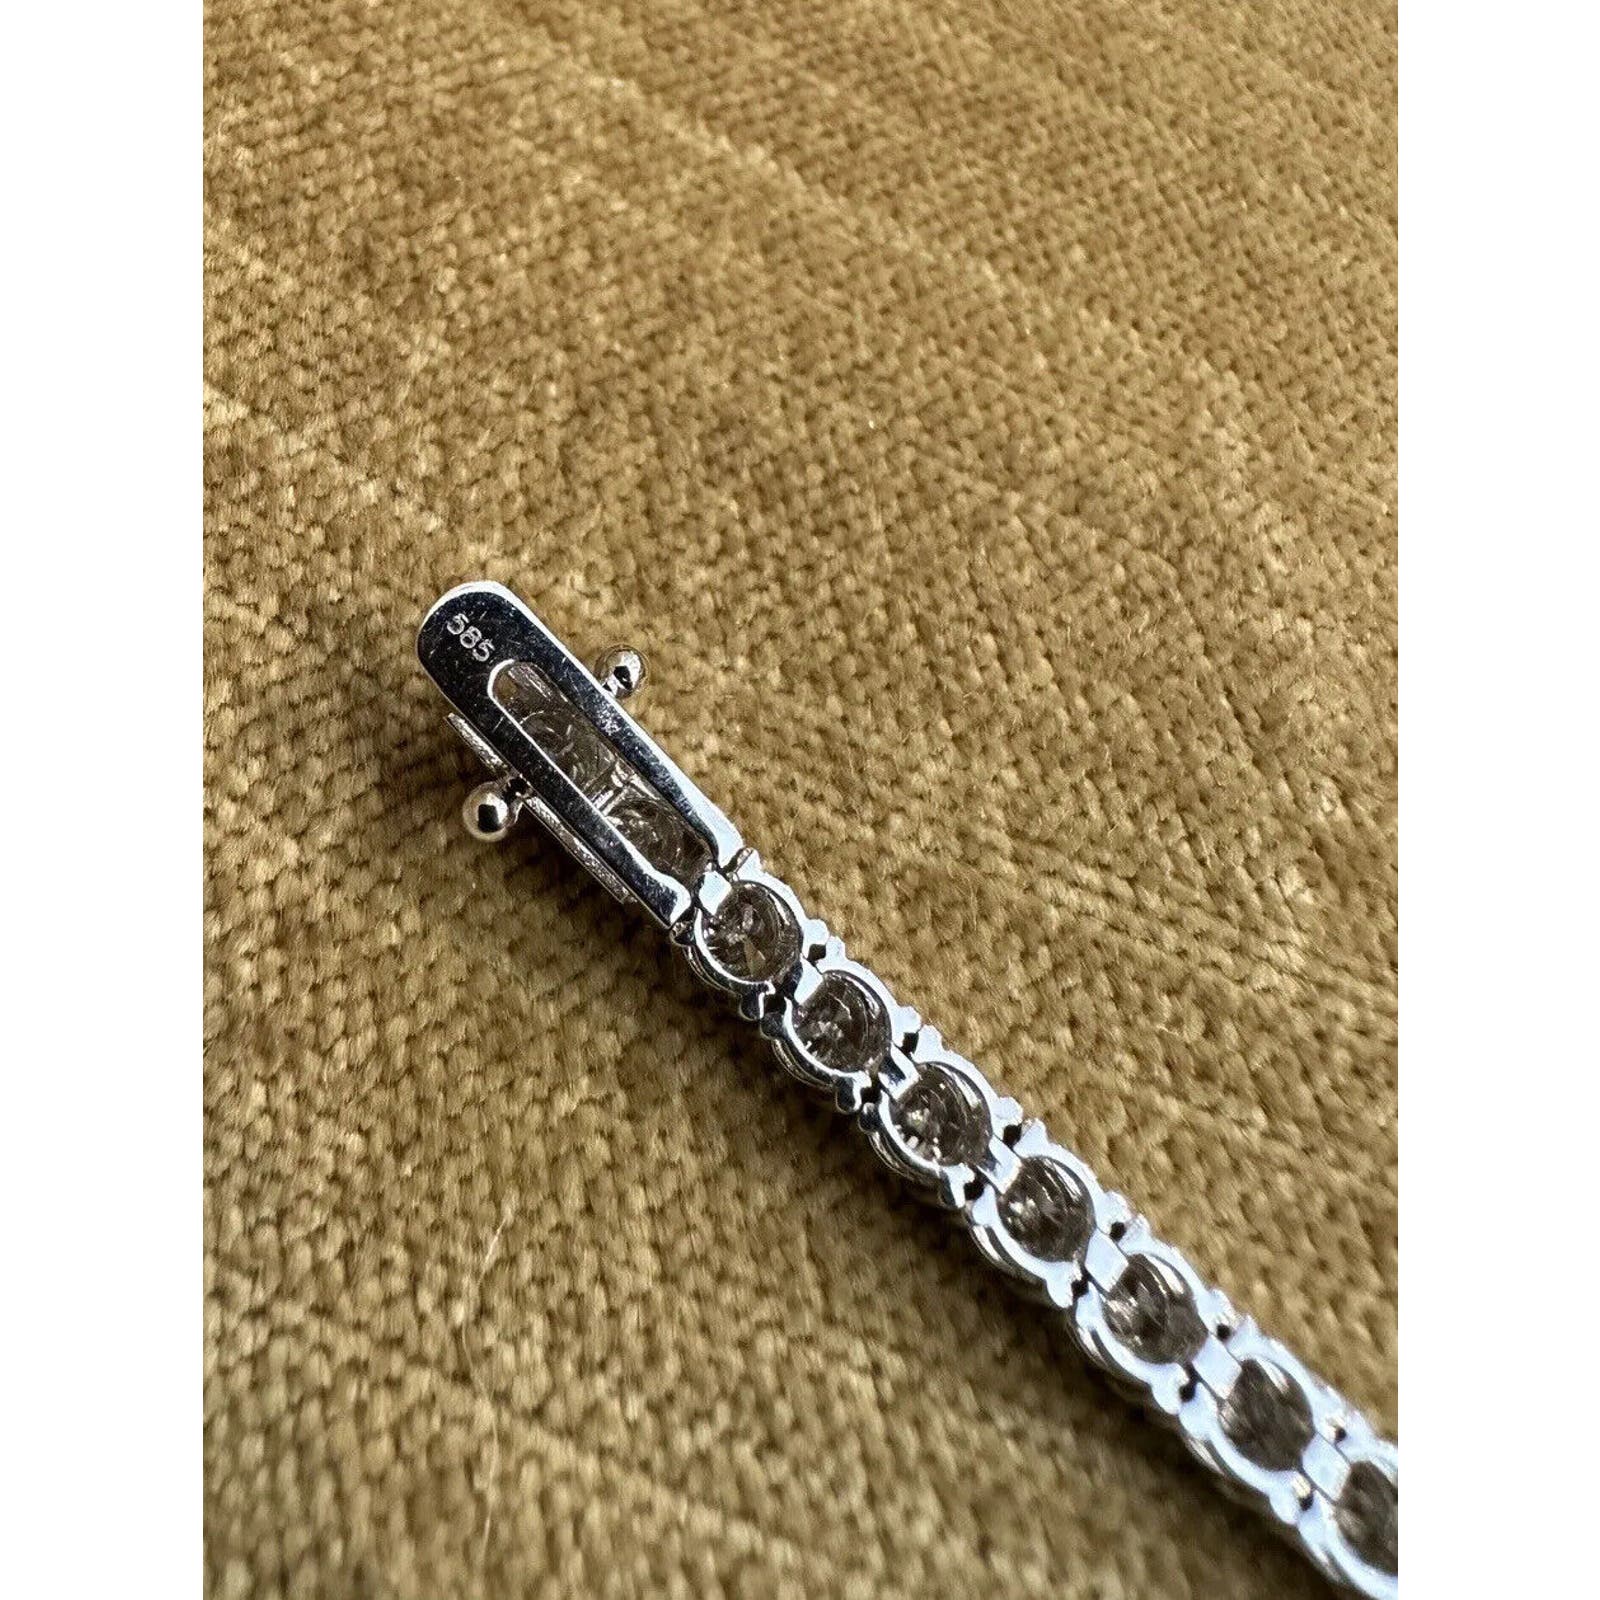 Diamond Tennis Bracelet Rounds 7cts in 14k White Gold 7 inches - HM2516B